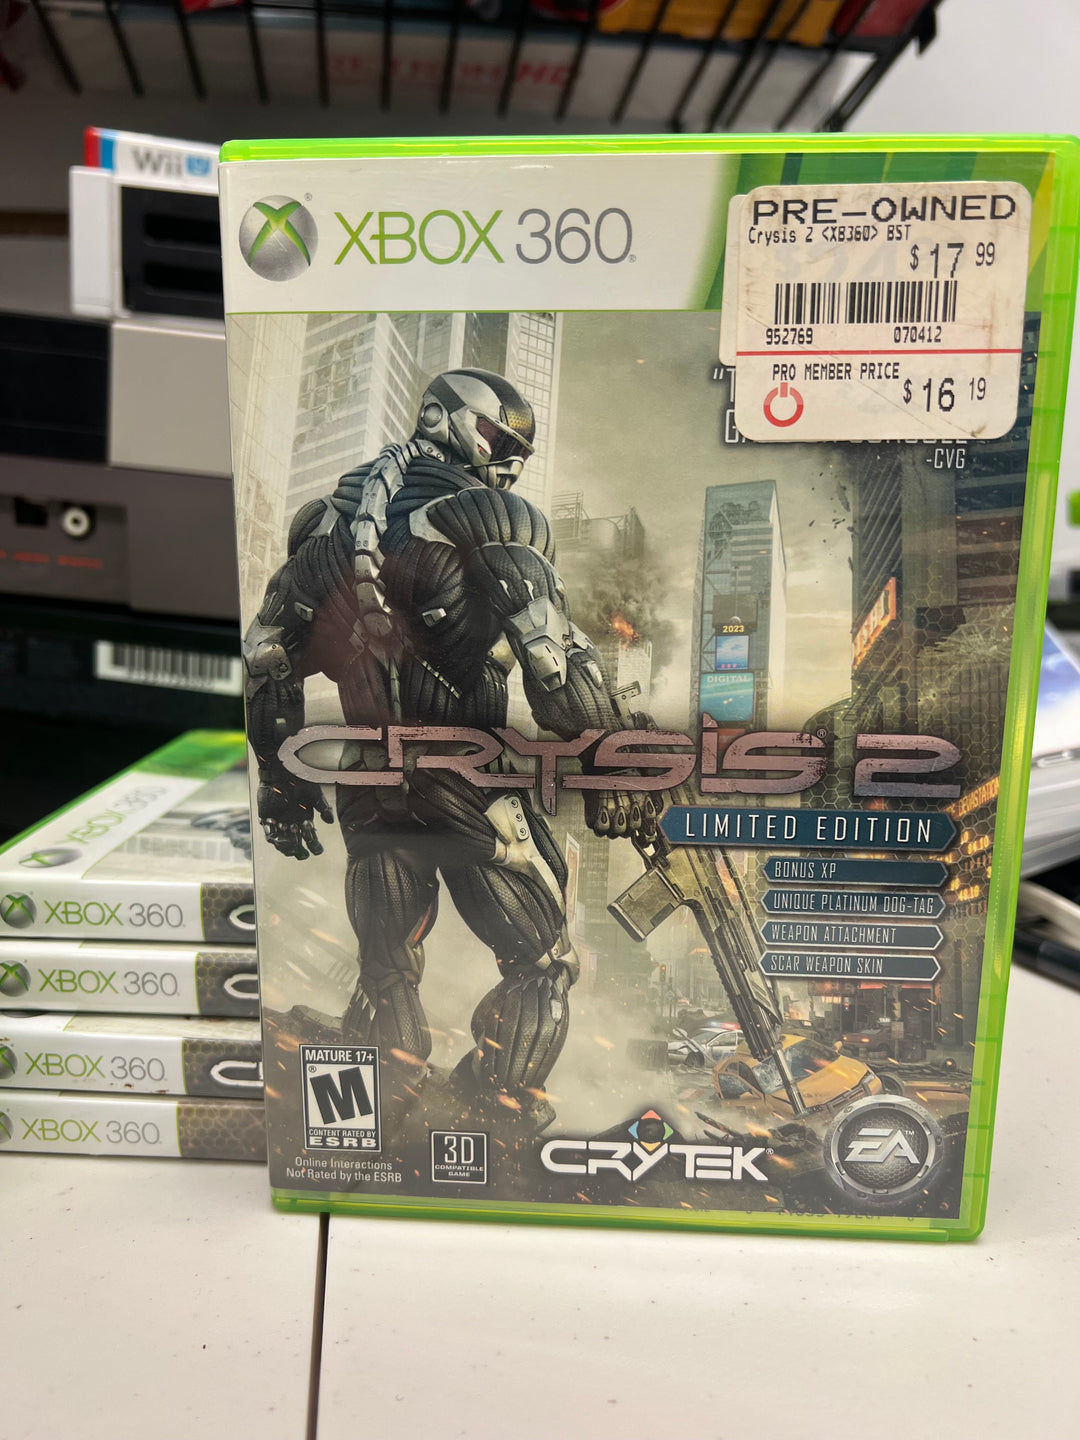 Crysis 2 Limited Edition for Microsoft Xbox 360 in case. Tested and Working.     DO61124